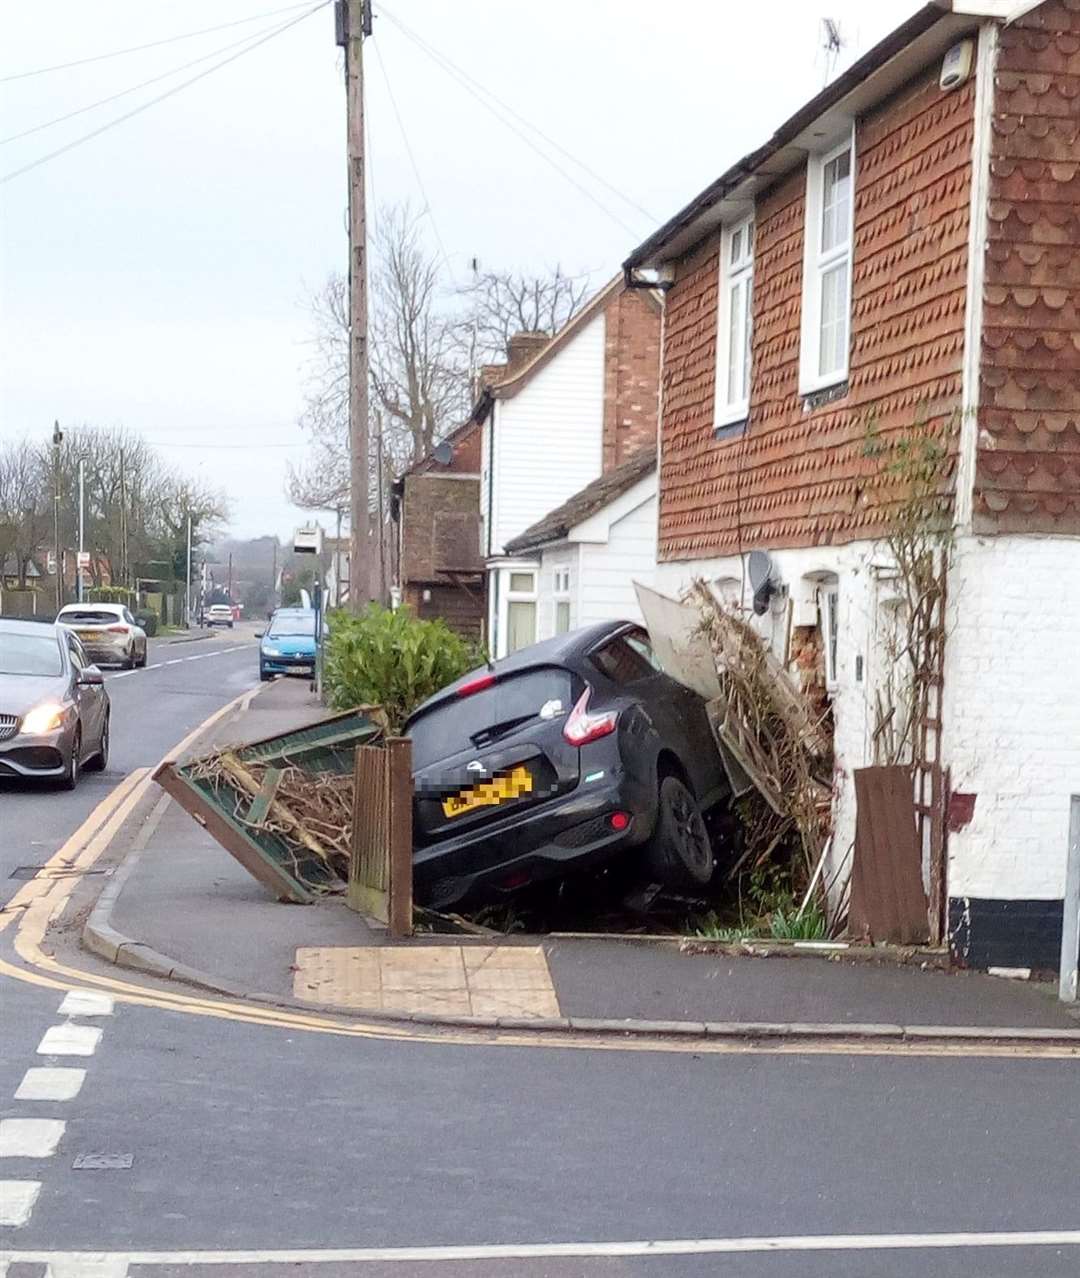 A black Nissan crashed into a house in Wheeler Street, Headcorn, at around 6.15am. Picture: Keith Armstrong